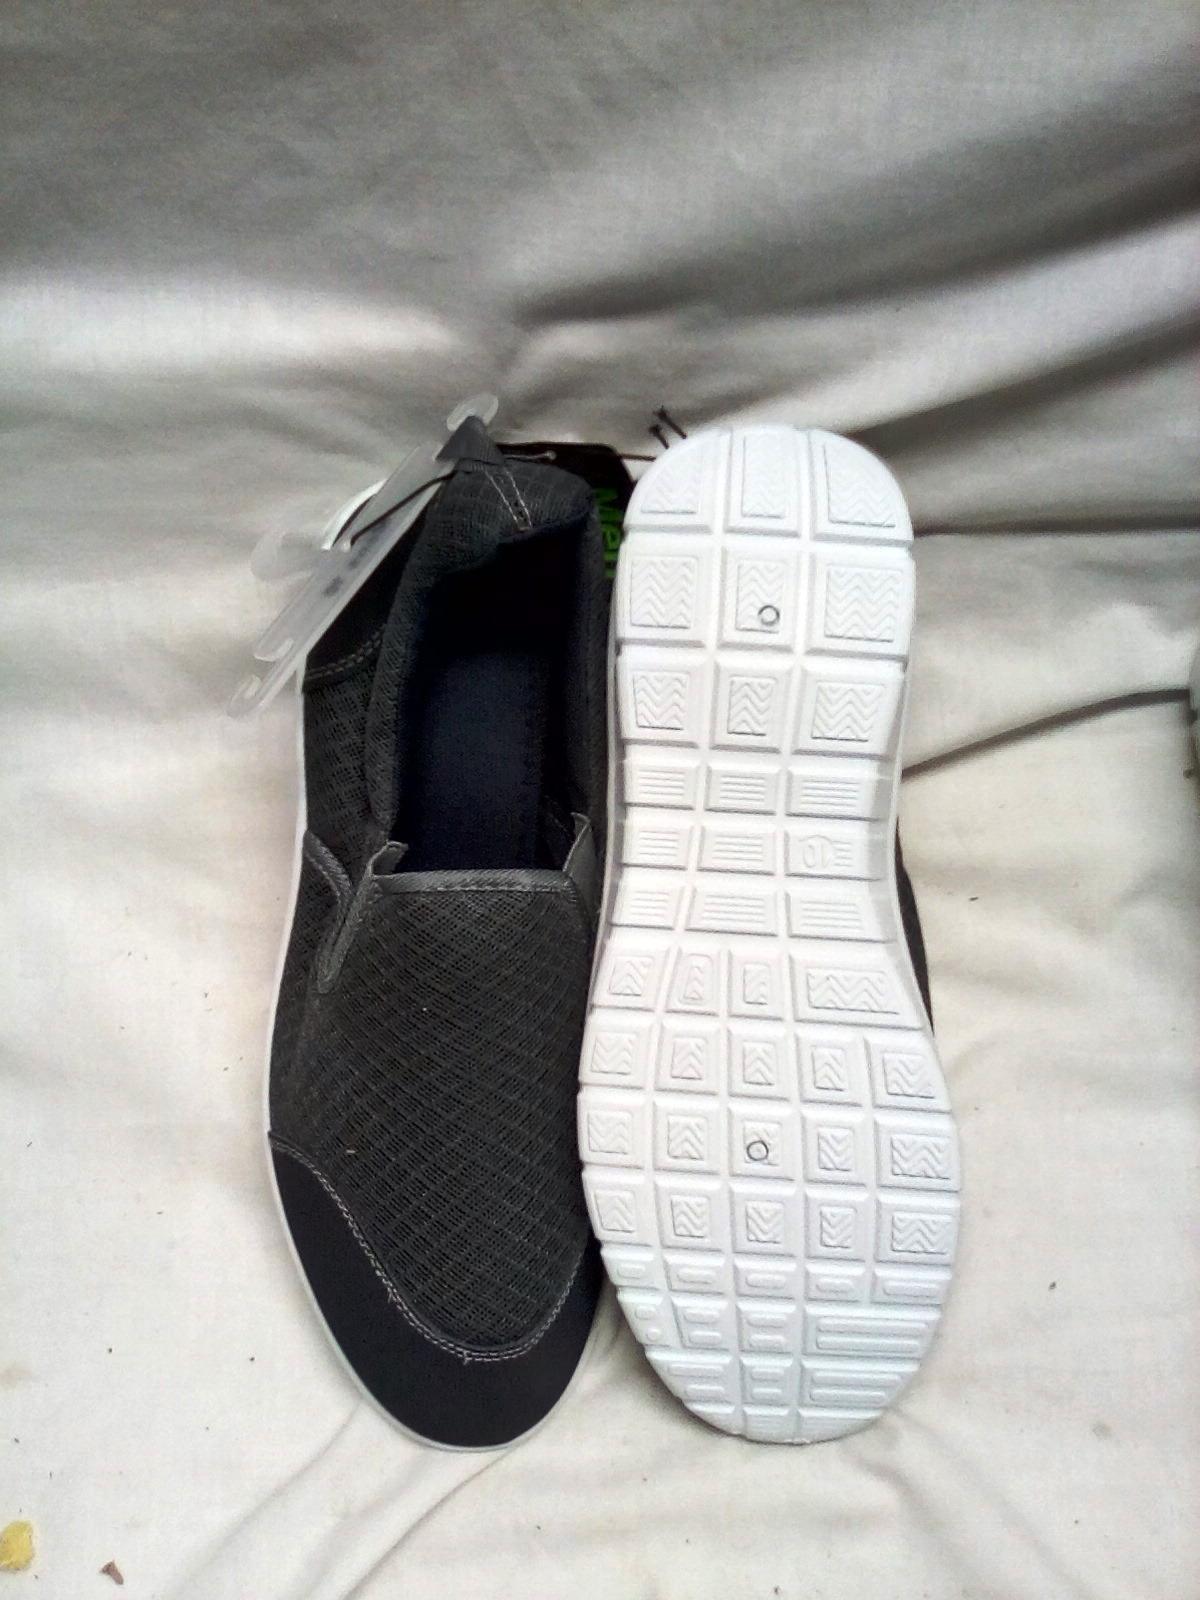 Men's Everyday Shoes New Items with tags Size 10